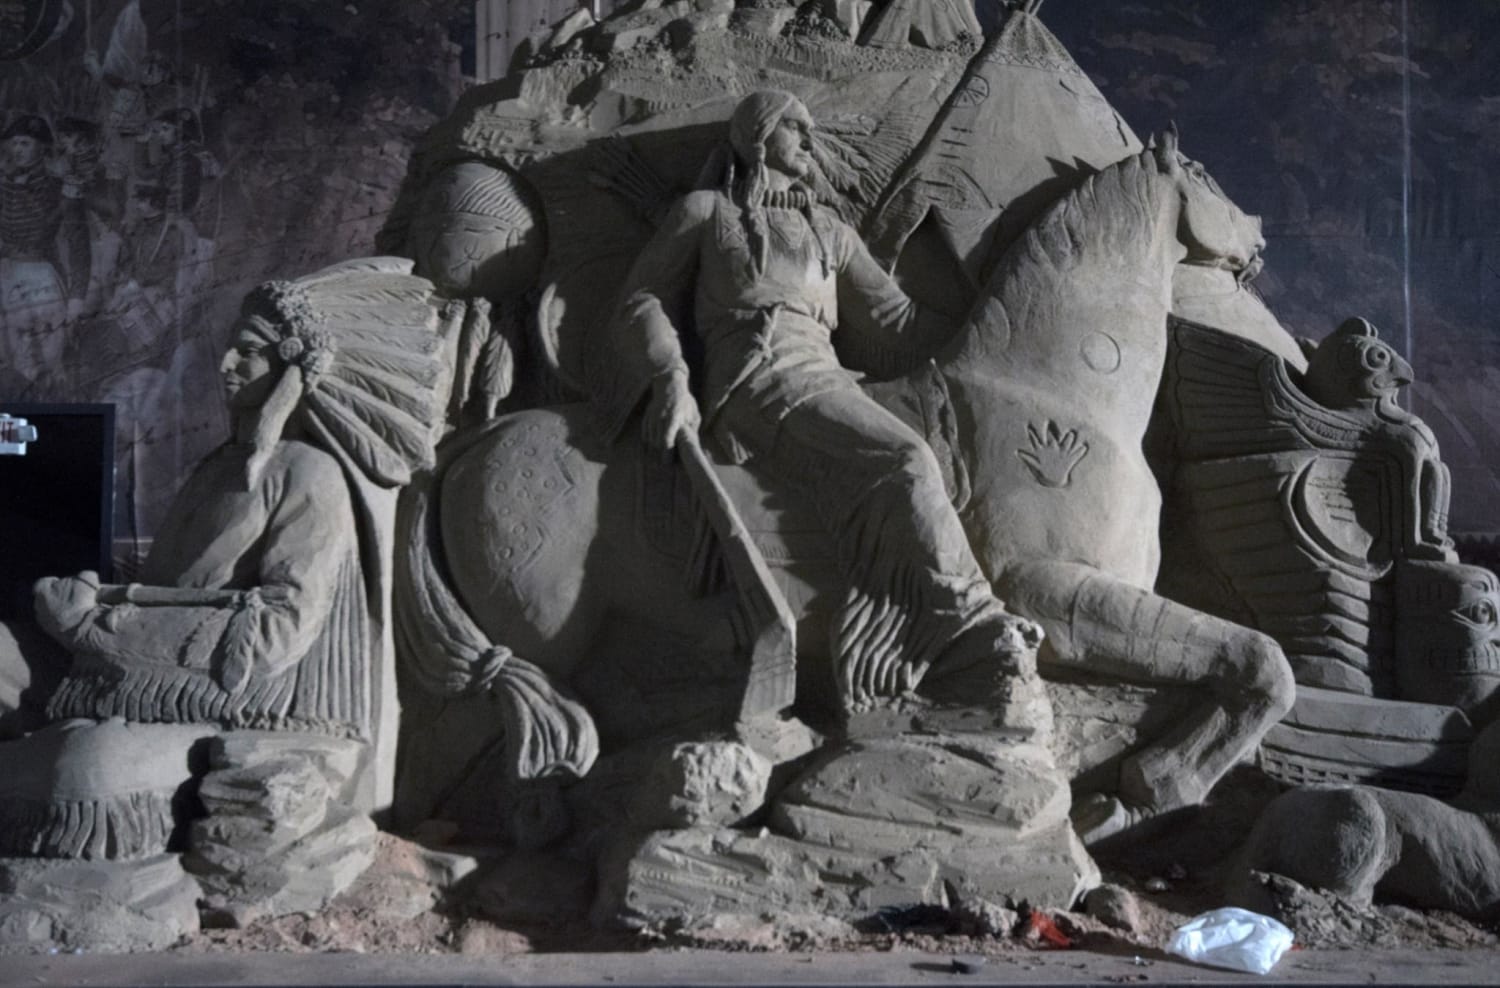 Abandoned Community Arena Filled With Sand Sculptures